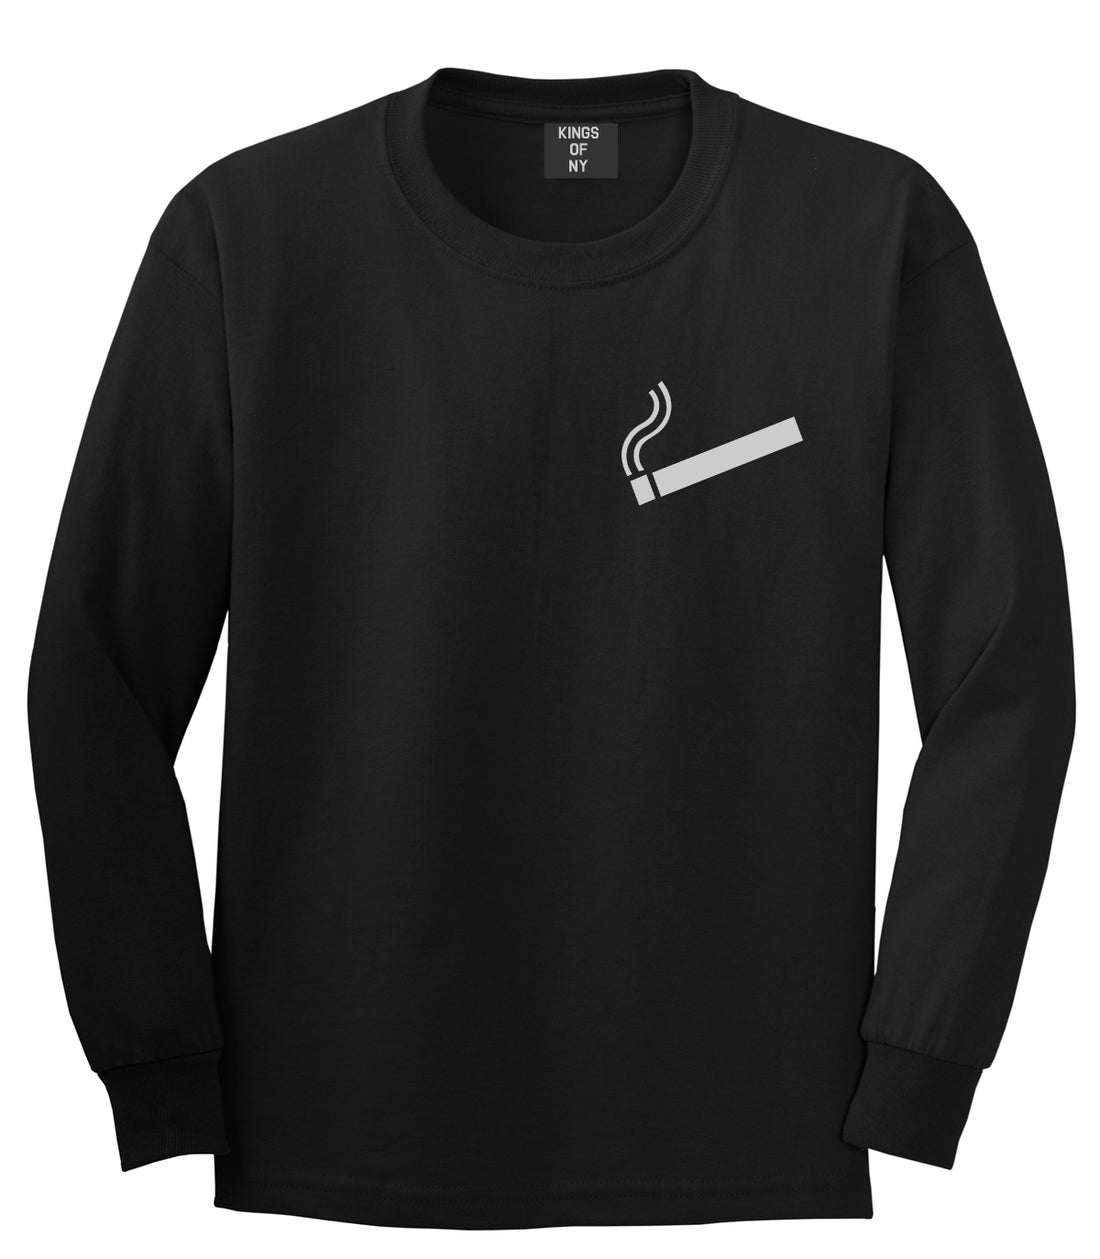 Cigarette Chest Black Long Sleeve T-Shirt by Kings Of NY